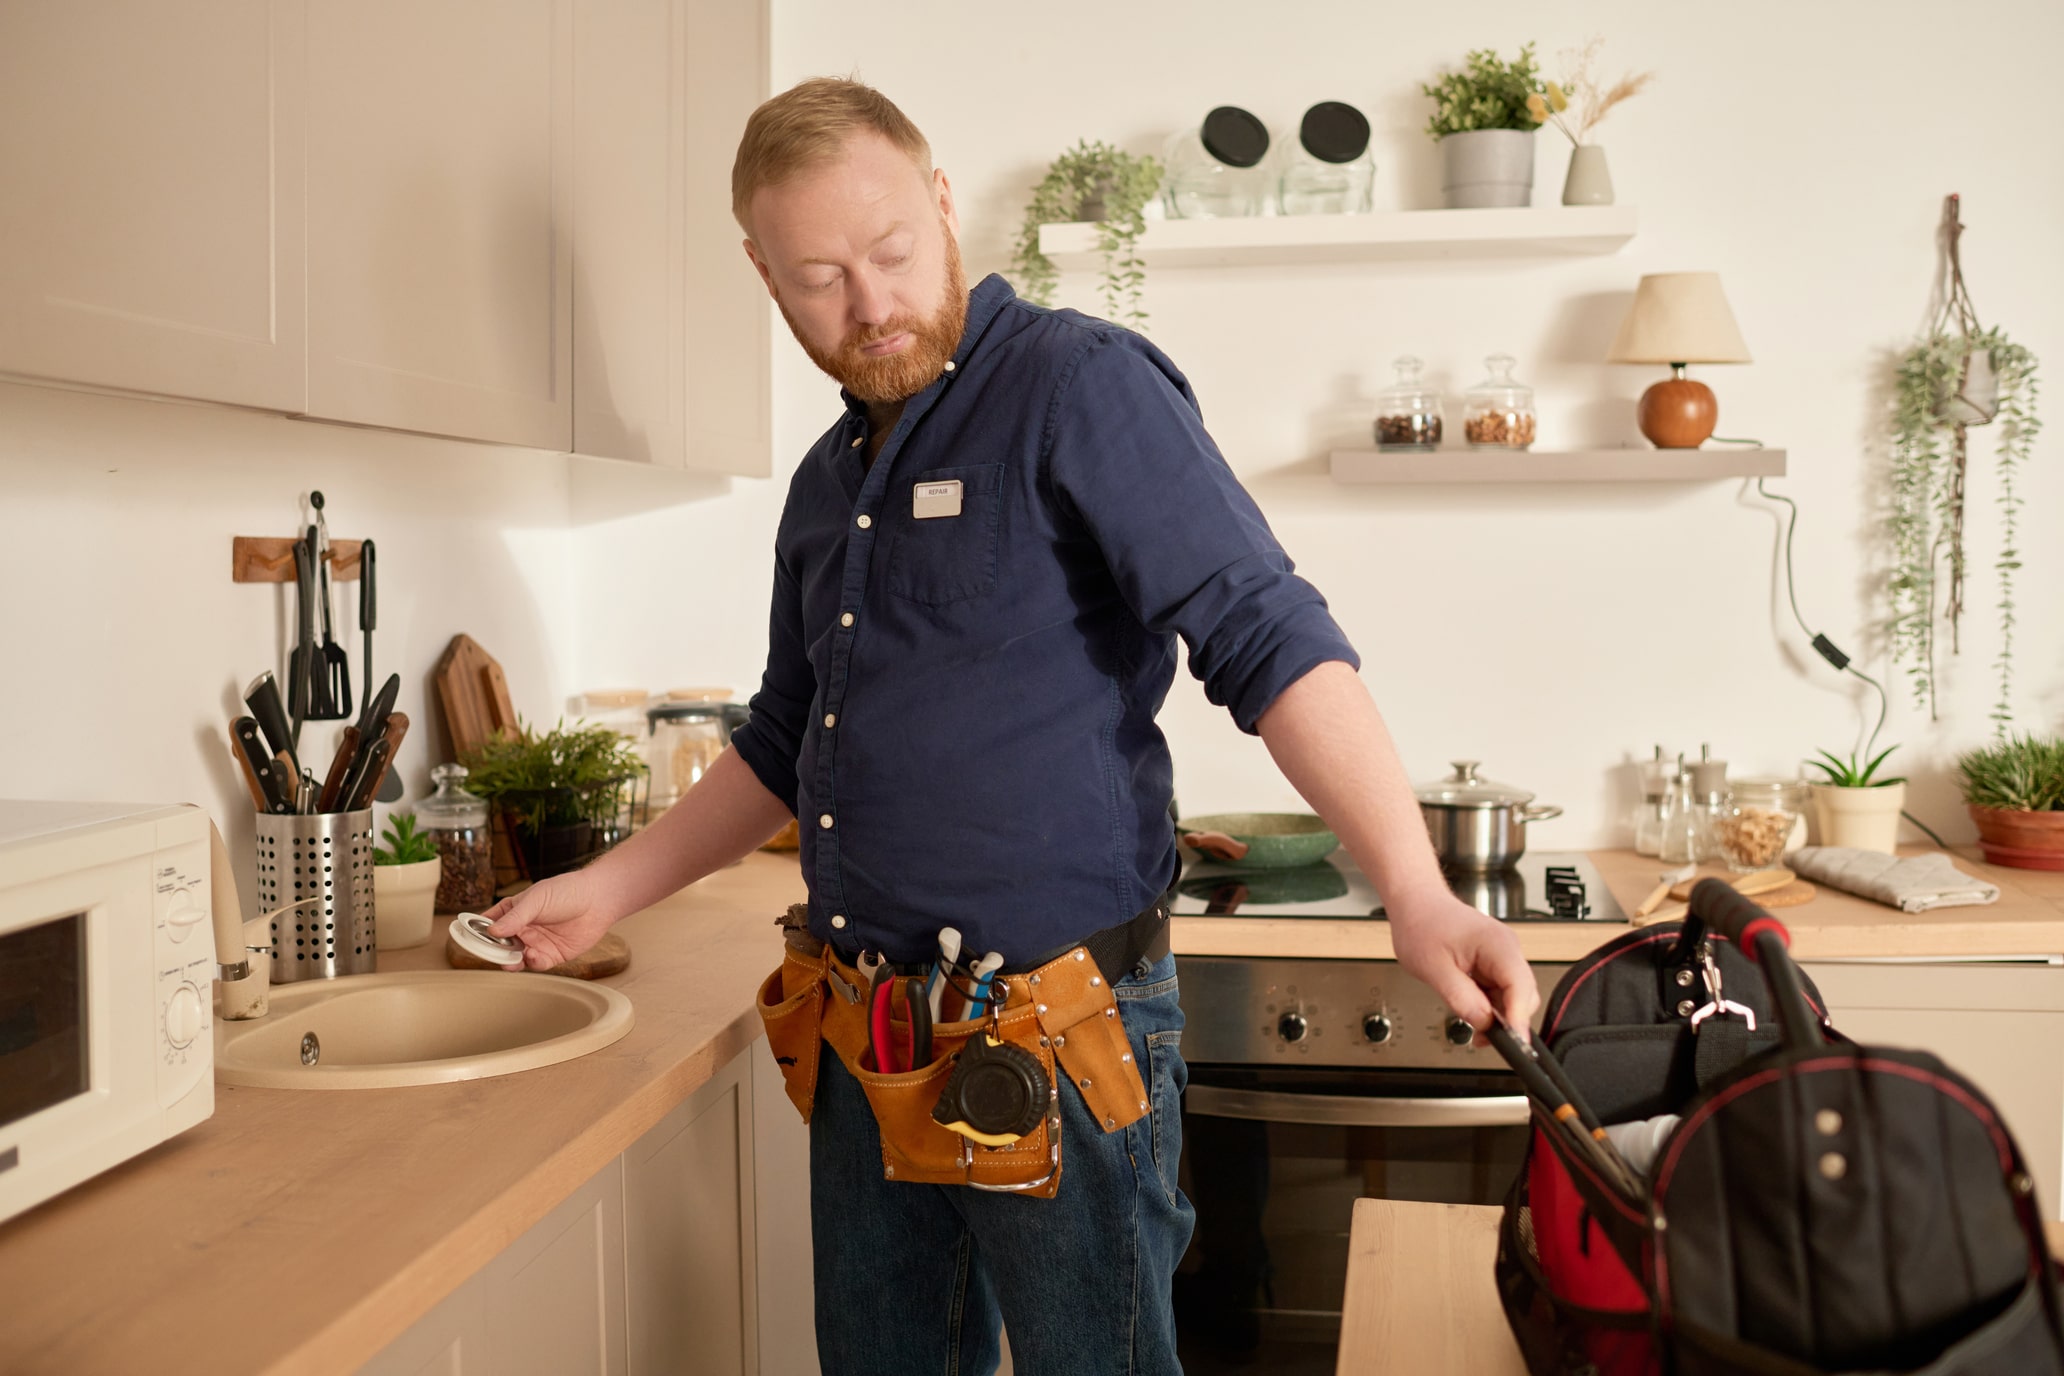 Man in a blue shirt and tool belt inspecting a kitchen sink.